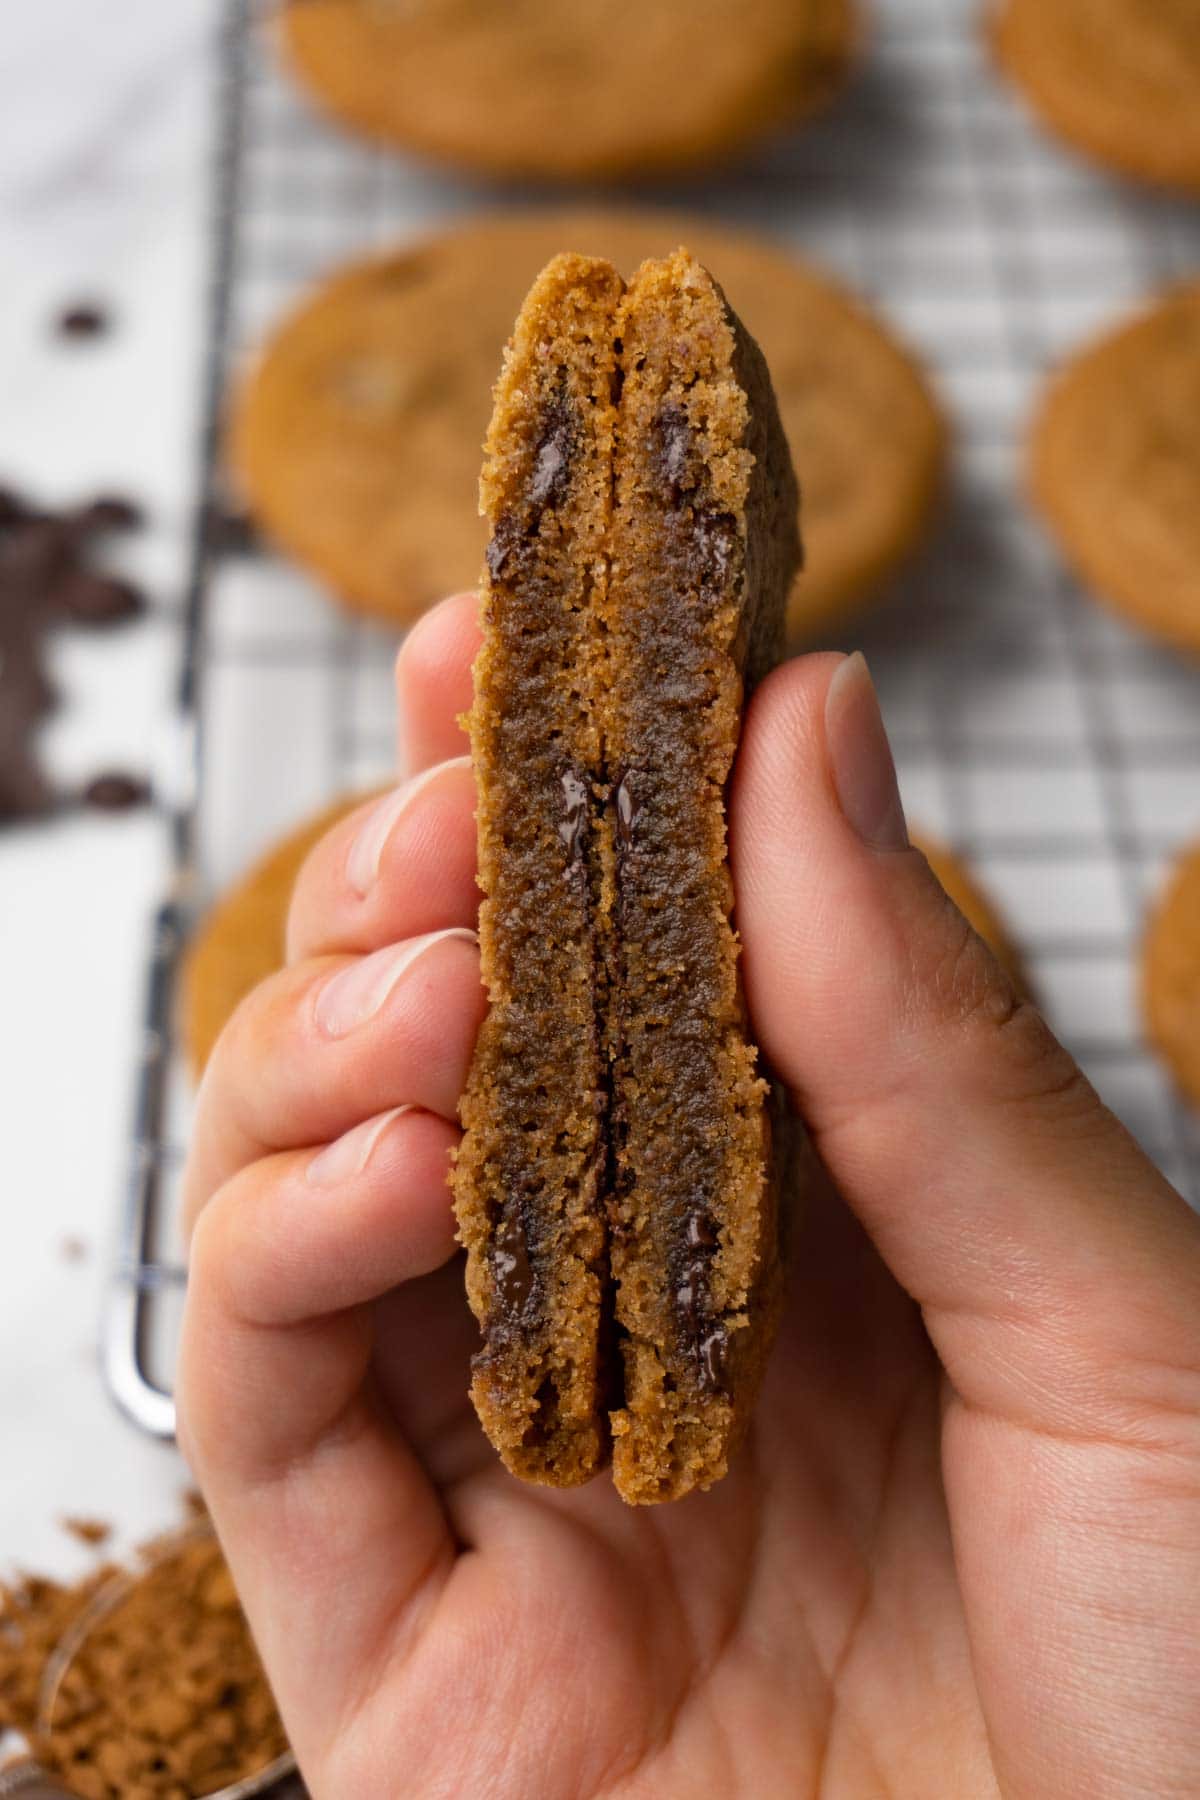 A hand is holding a cut-in-half chocolate chip coffee cookie.